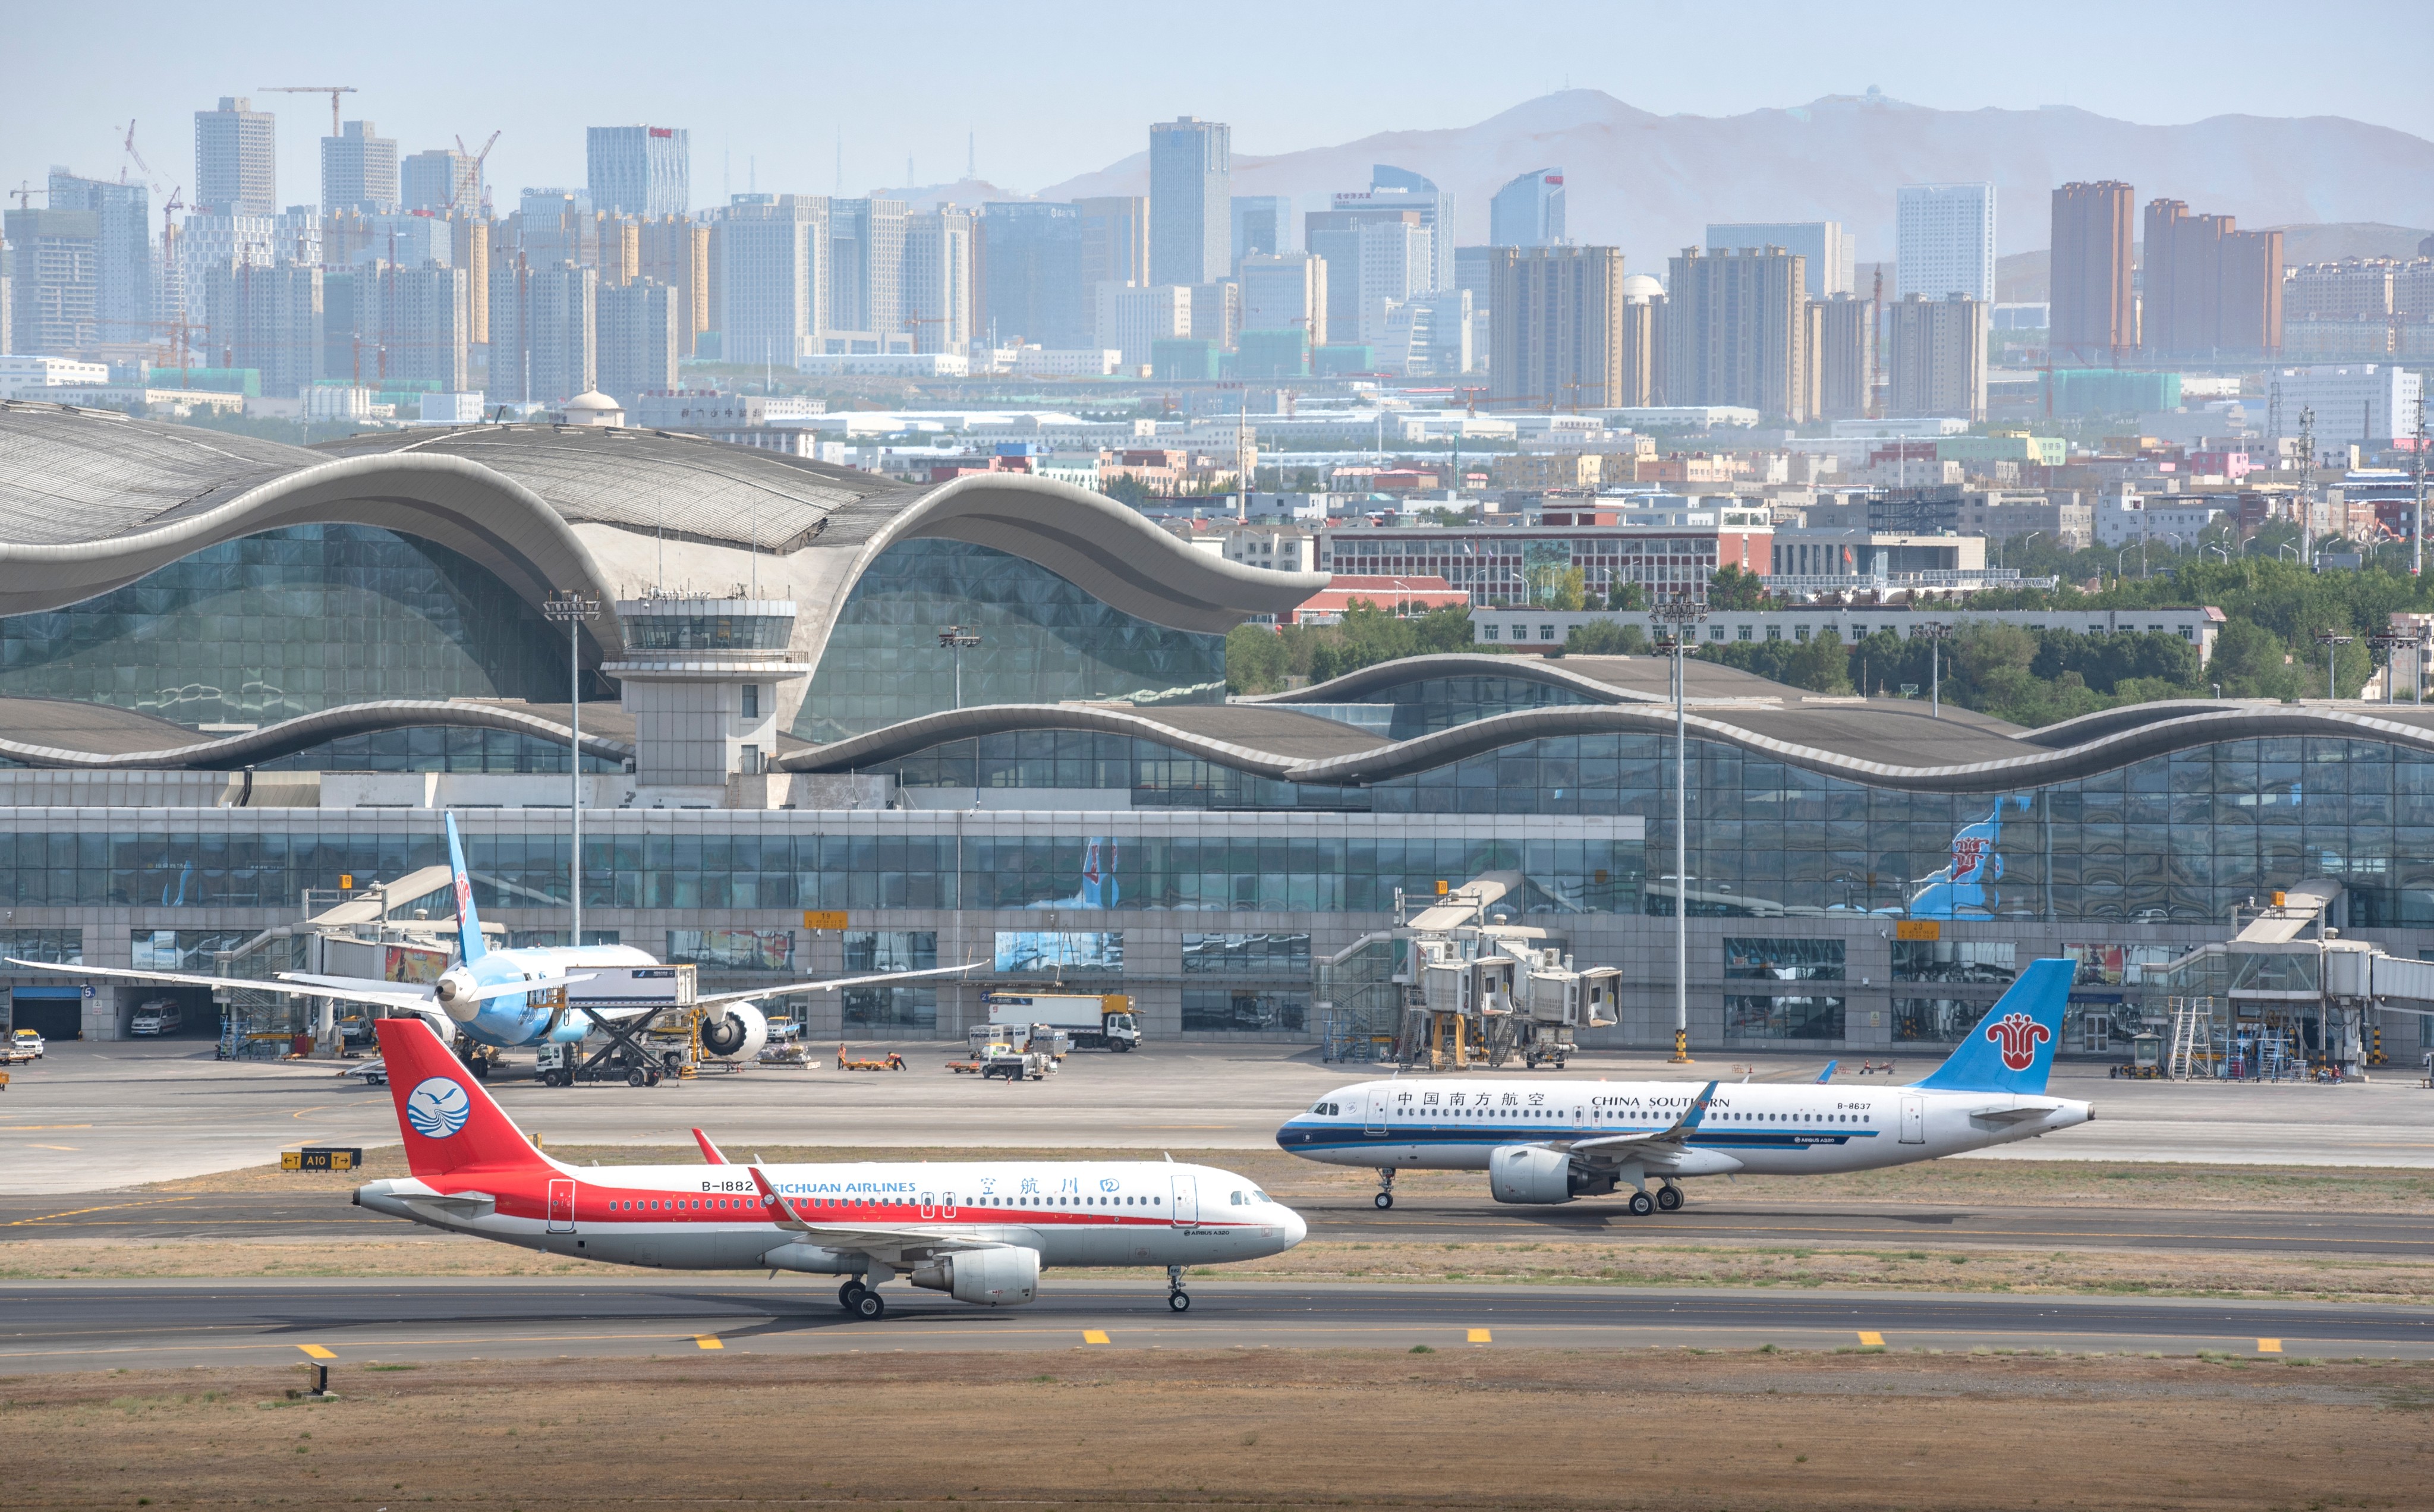 Aviation officials have pledged a speedy return to pre-pandemic levels for China’s international air traffic. Photo: Shutterstock